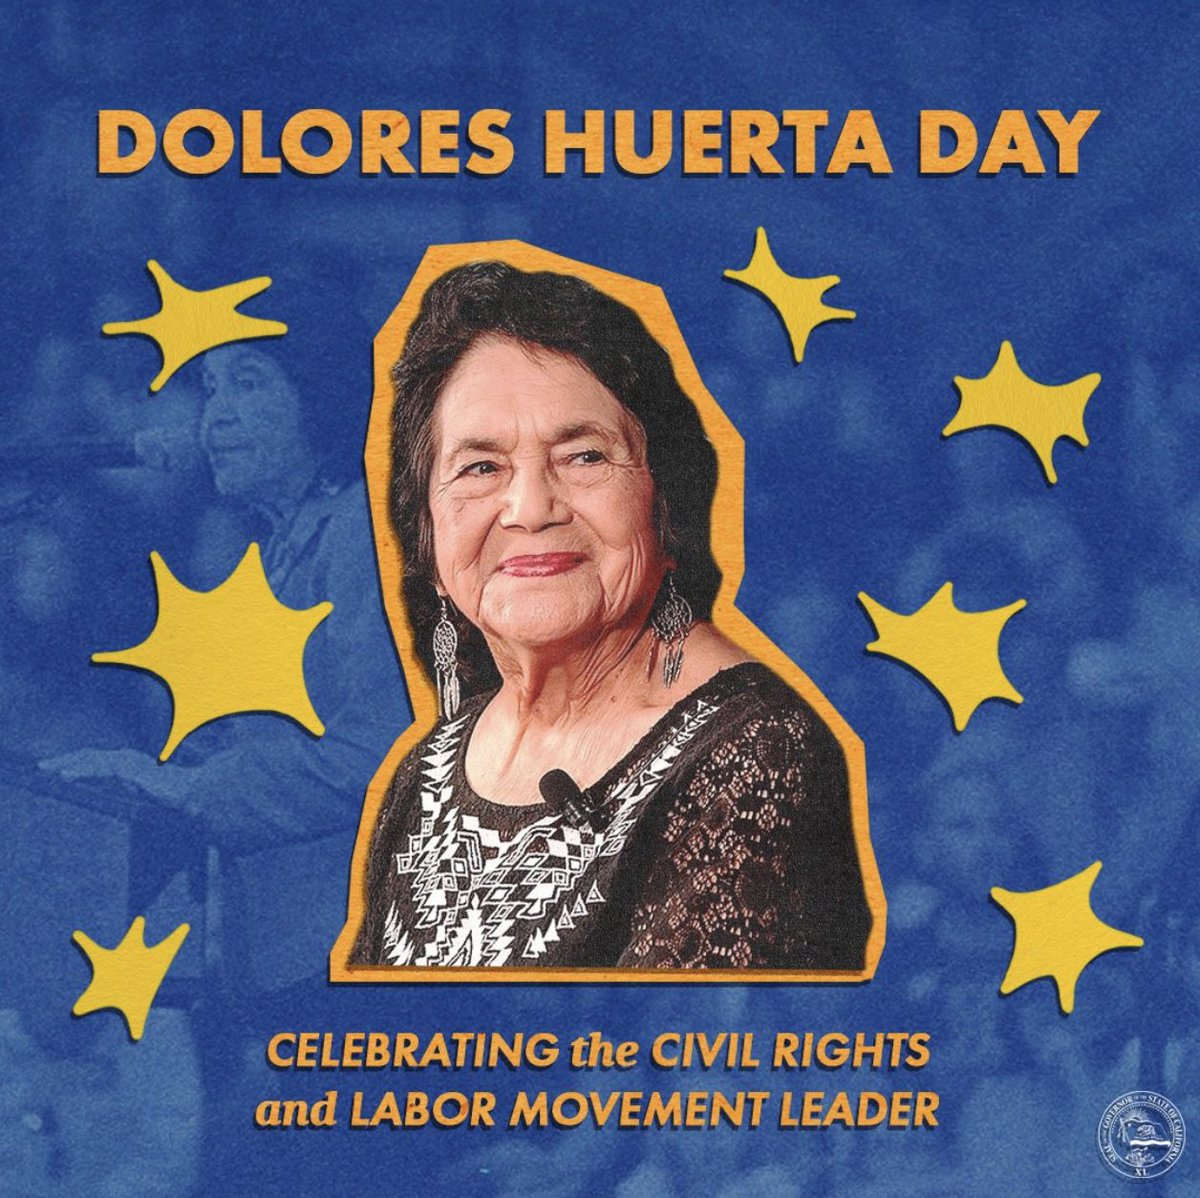 On Dolores Huerta Day, we celebrate one of CA's most dedicated civil & labor rights leaders. Her lifelong pursuit of justice has earned her many accolades, including a place in the CA Hall of Fame. To this day, she continues her work to fight for marginalized communities.